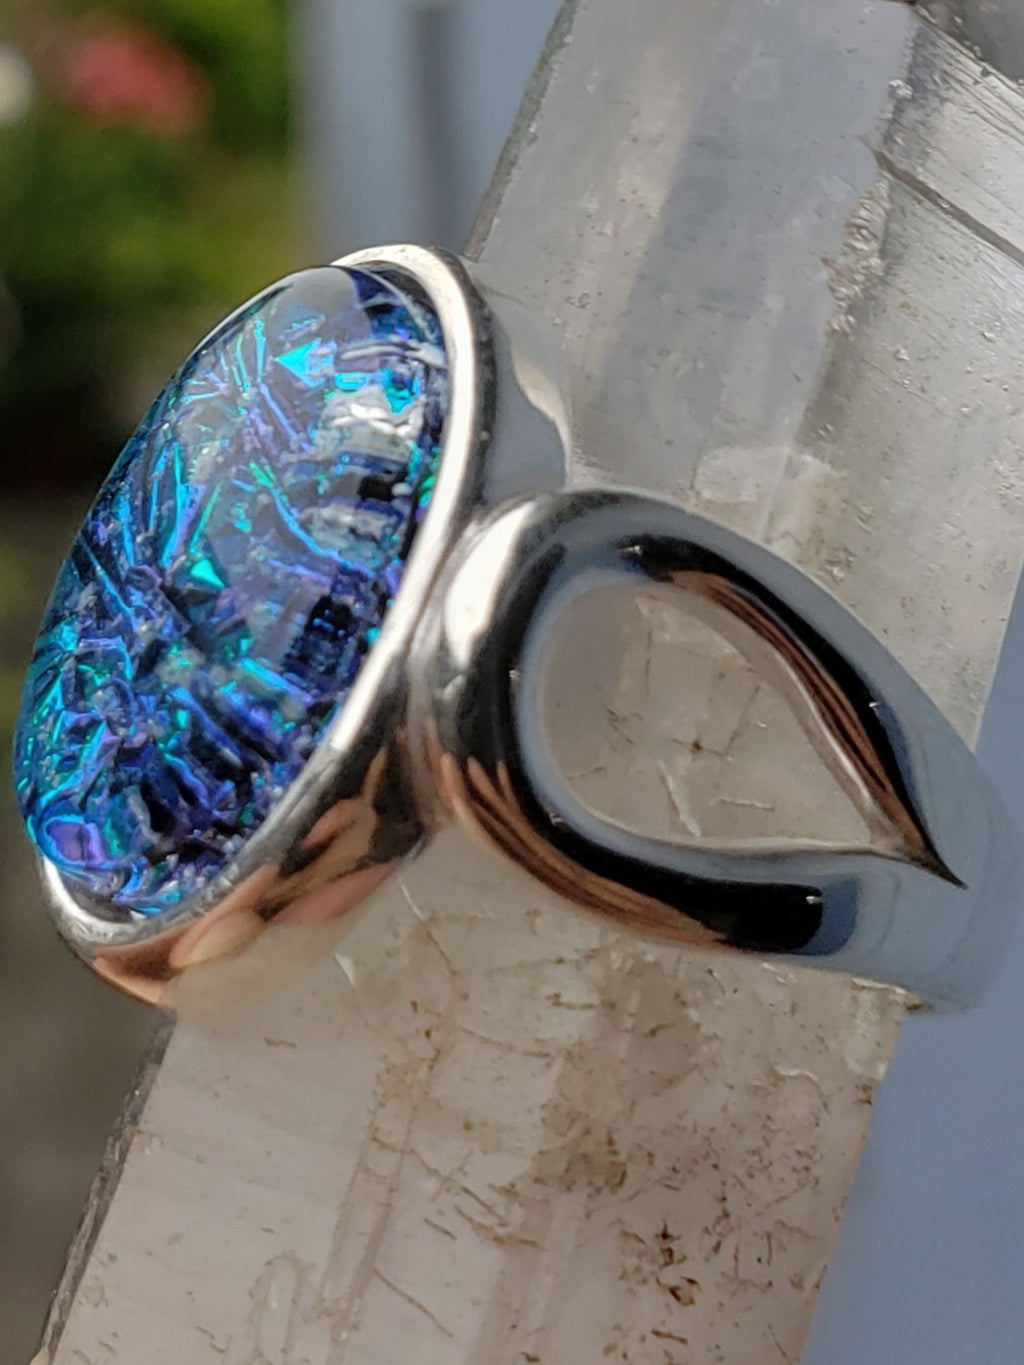 side view loop ring sterling silver, cremation jewelry, memorial jewelry, pet memorial jewelry, cremation ring, memorial ring, handmade, urn ring, ashes in glass, ashes InFused Glass, ring for Ashes, sympathy gift USA Handmade by Infusion Glass Artist Joele Williams Human and Pet Cremation Ash Remembrance Urns AshesInfusedGlass.com